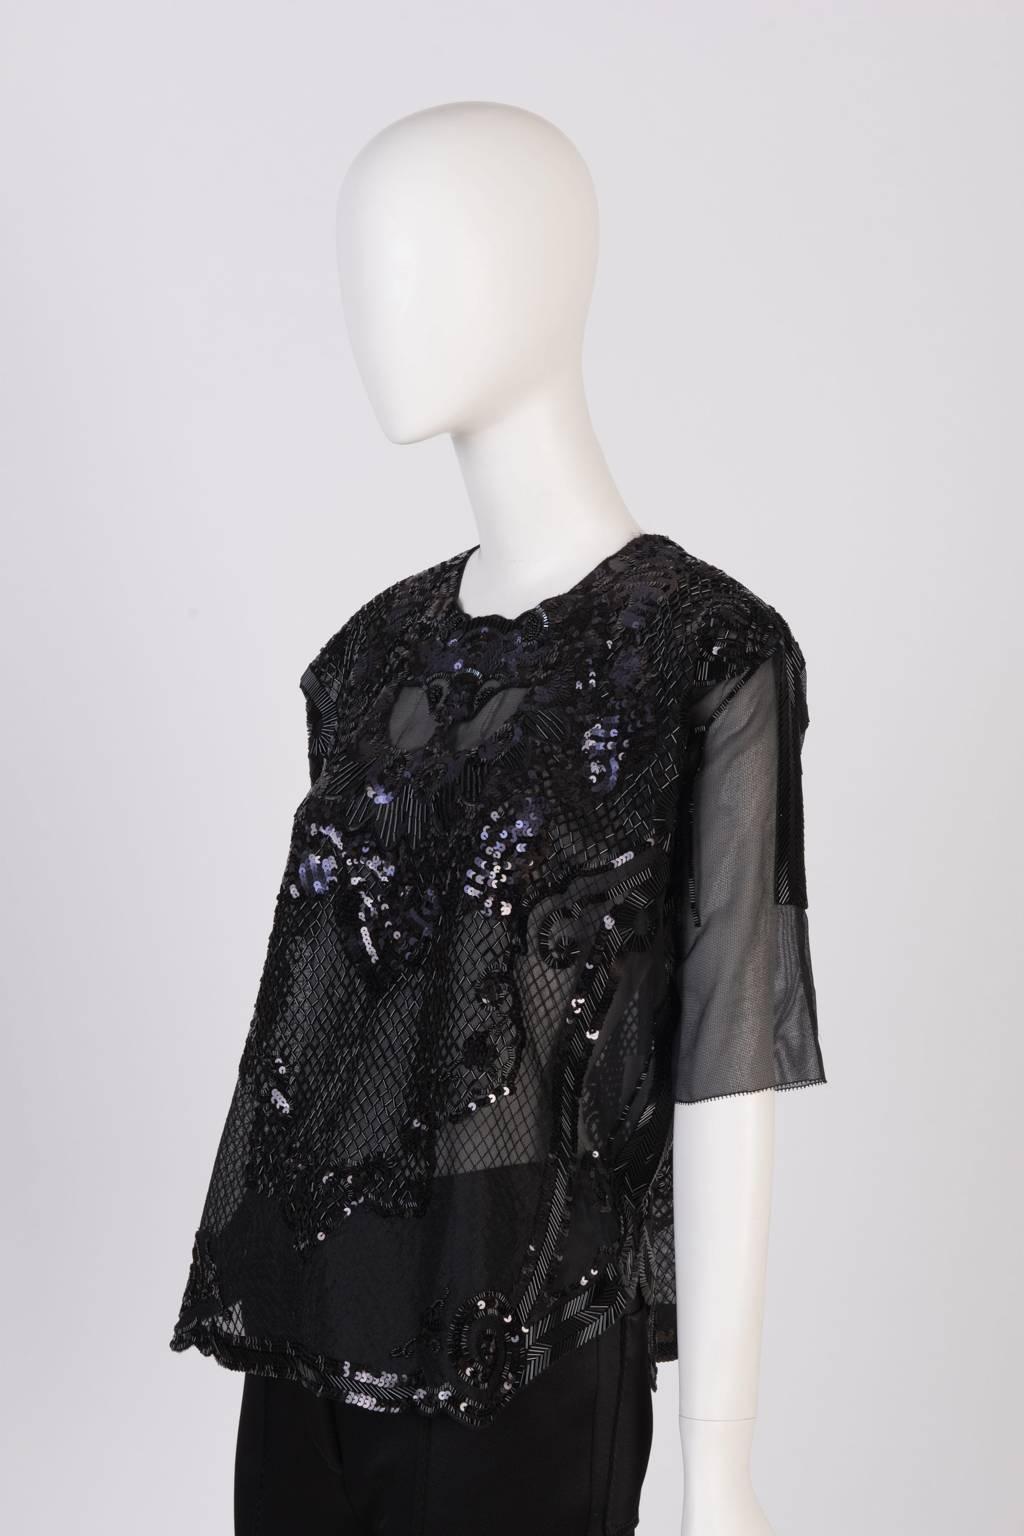 Sheer top with elbow length sleeve and Lion motif; hand embroidered with navy sequins and black bugle beads.